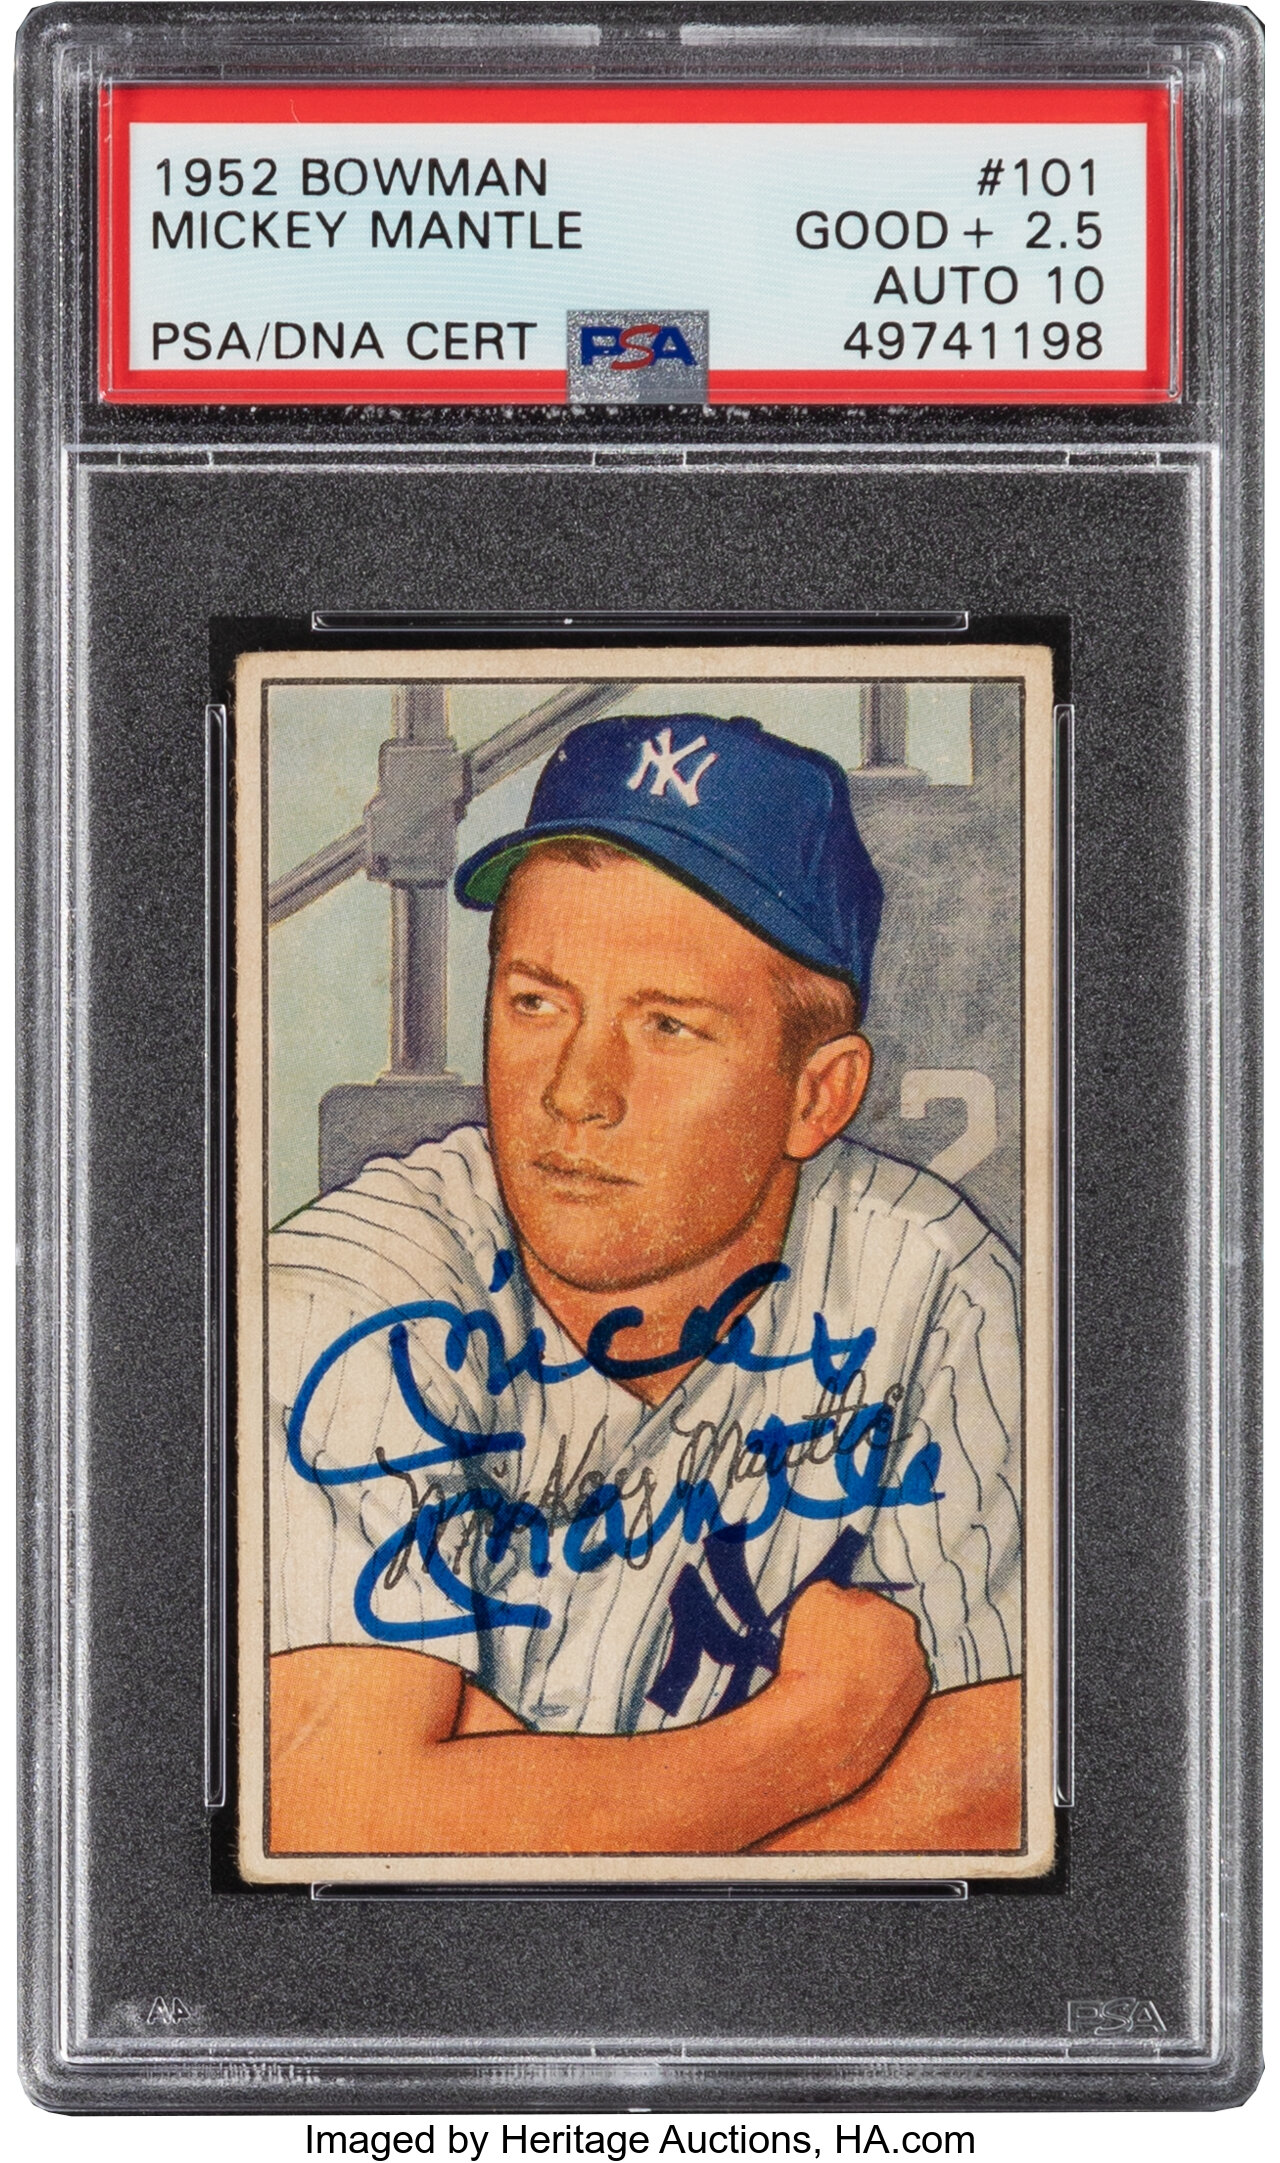 Mickey Mantle's signature through the years - Sports Collectors Digest